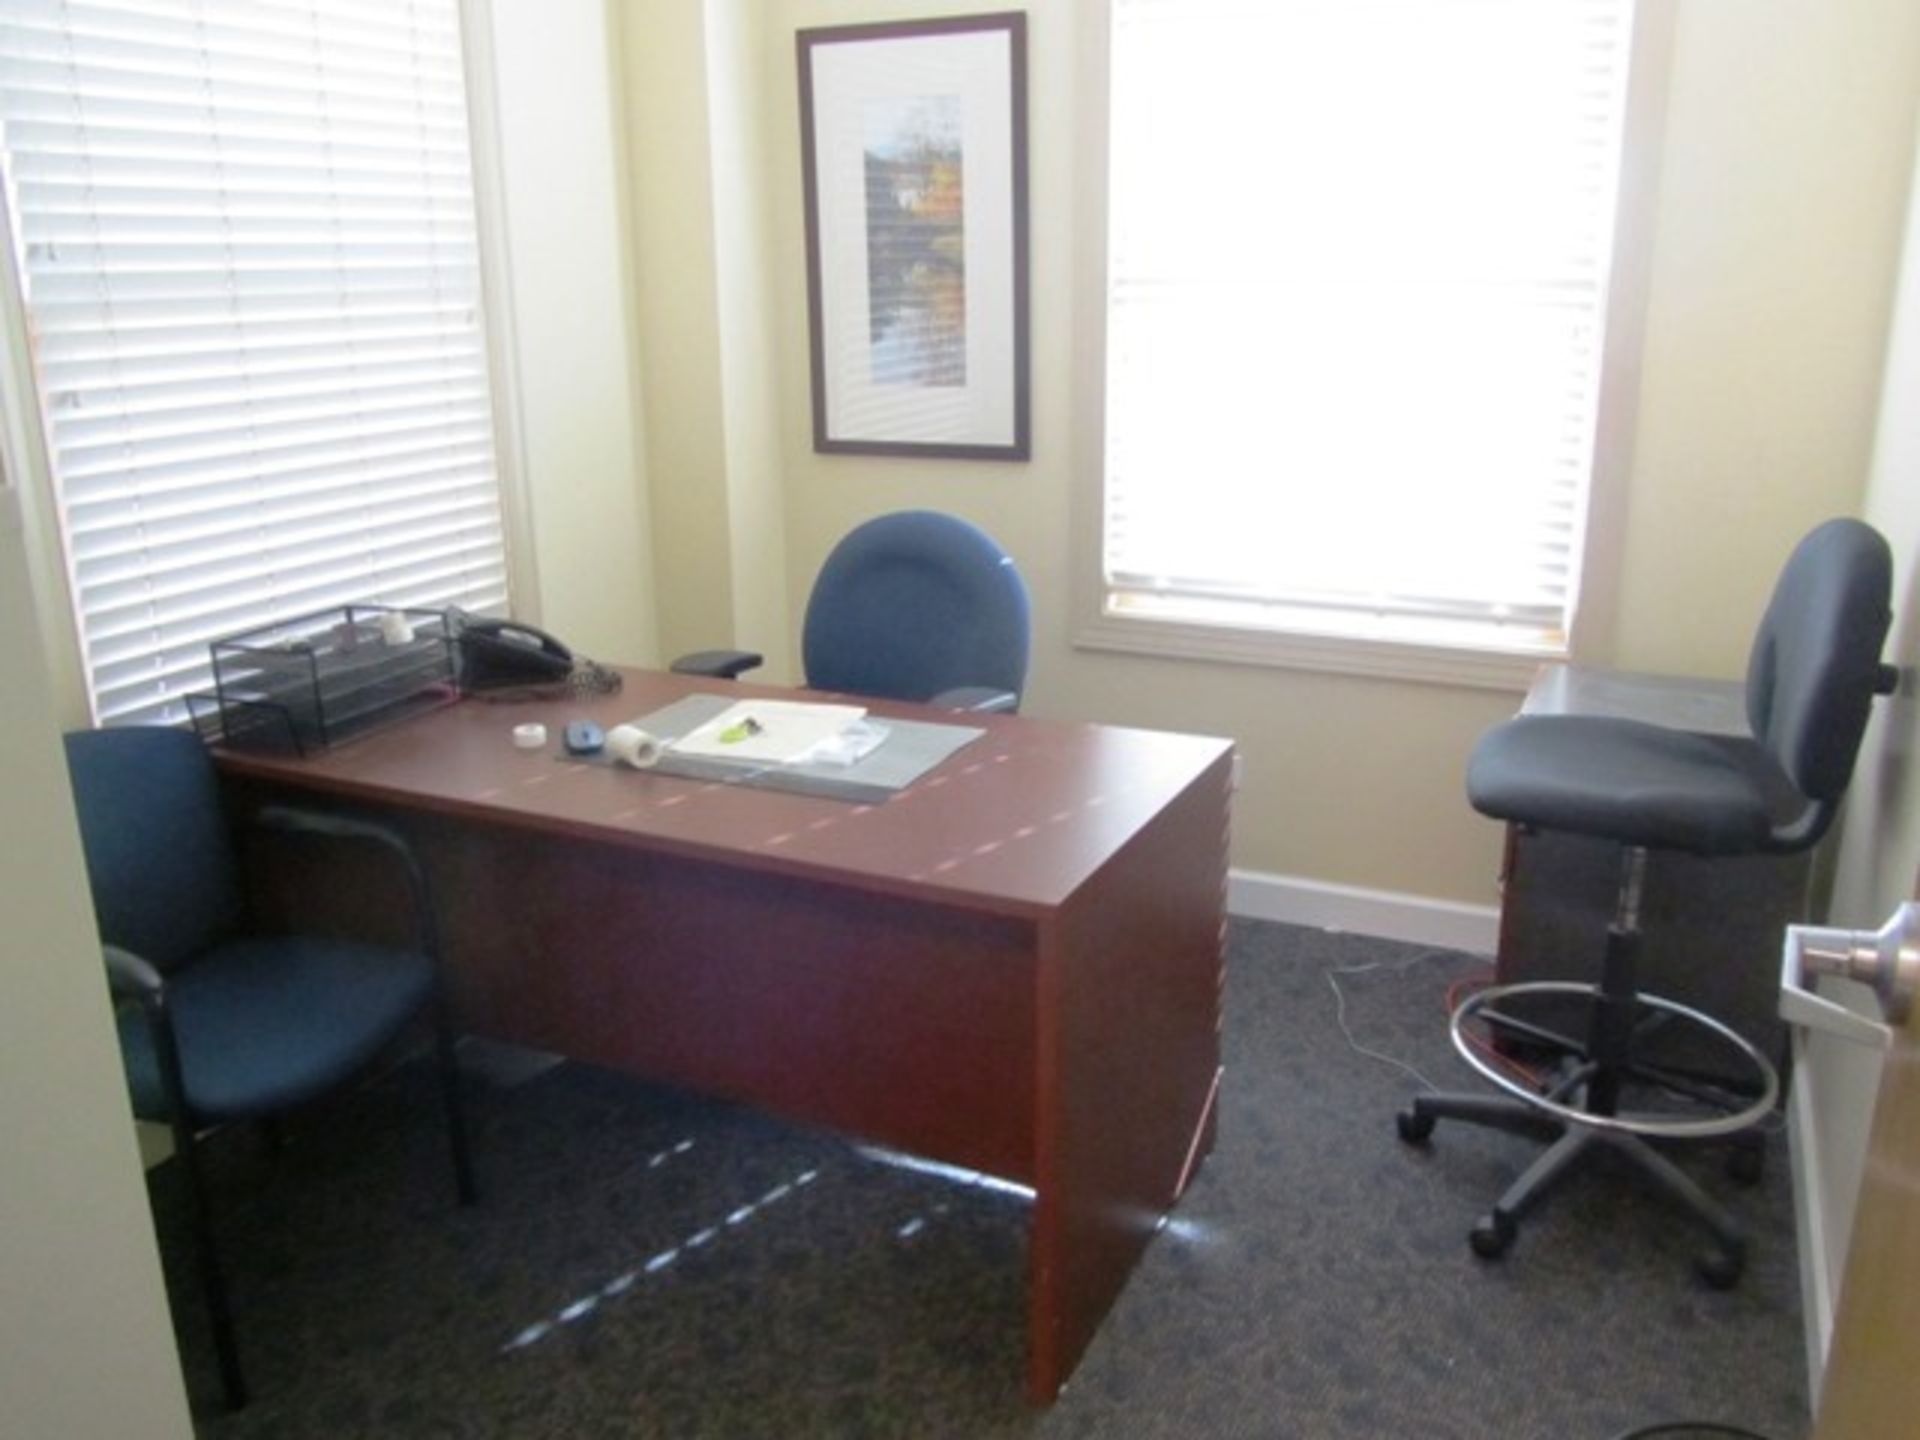 Contents of Office consisting of Desk, Chairs, Filing Cabinet (no computer)*located Orland Park, IL